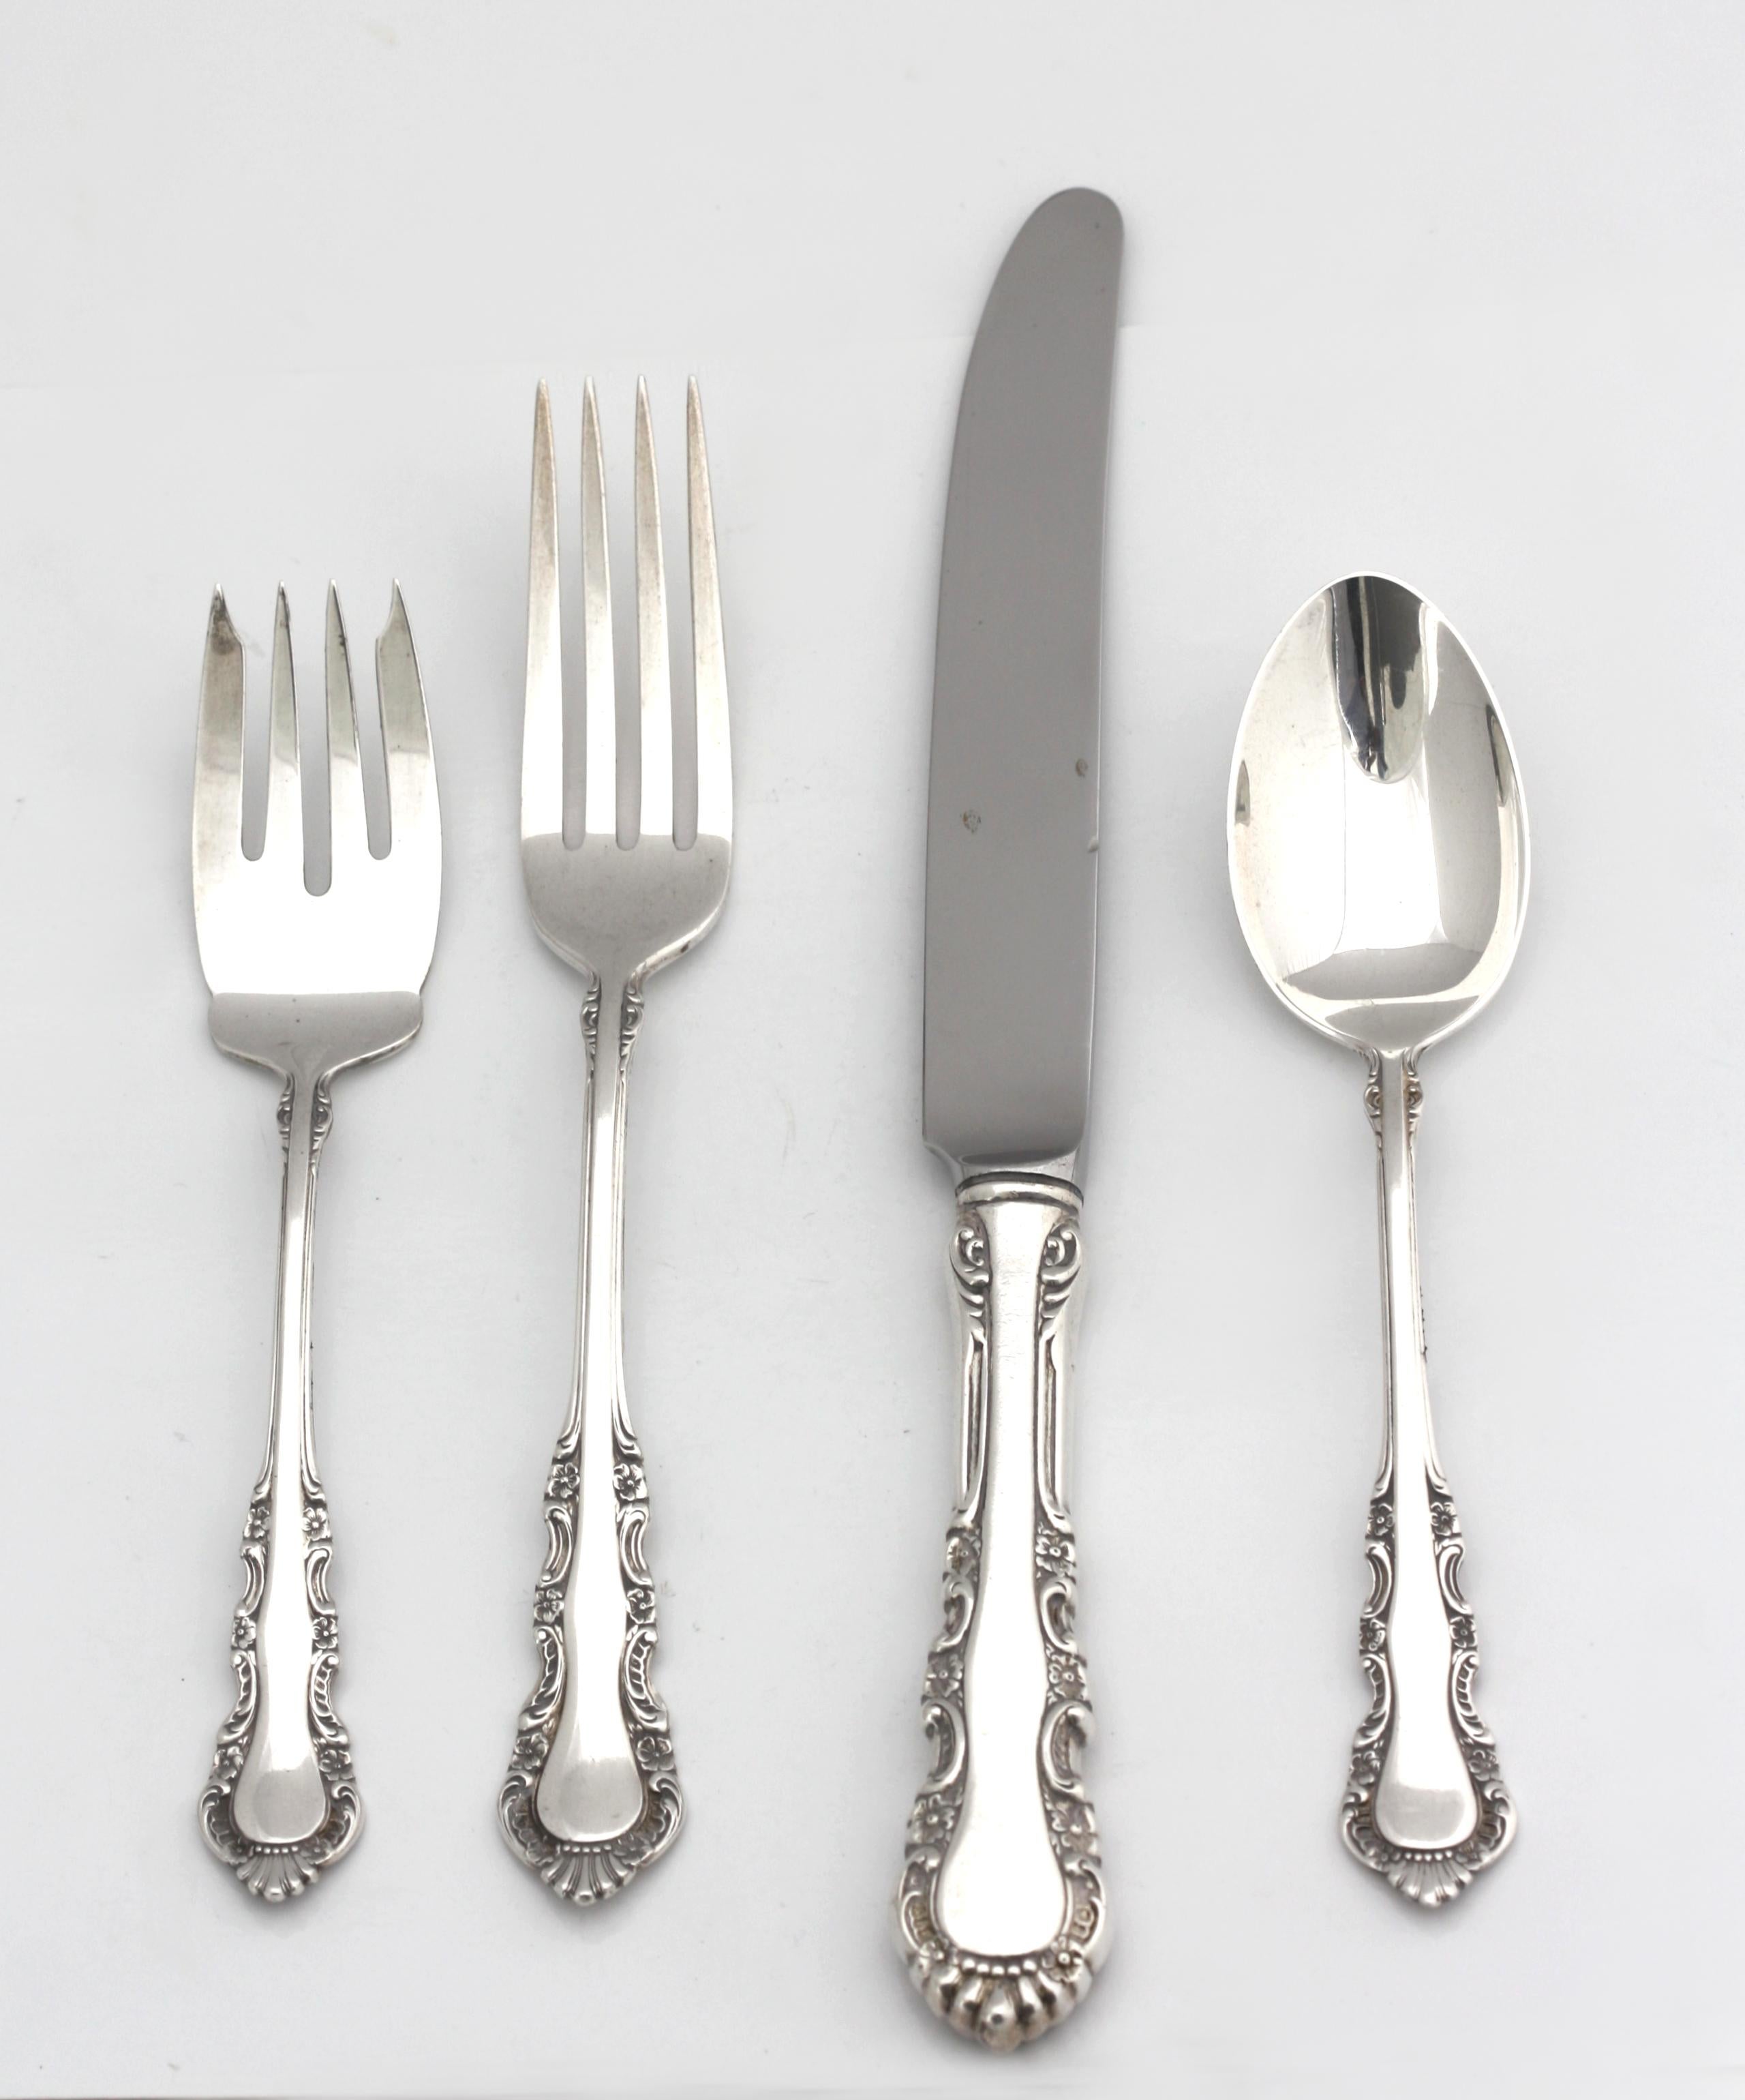  Reed & Barton Sterling Silver Fifty-Nine Piece Flatware Service  For Sale 1